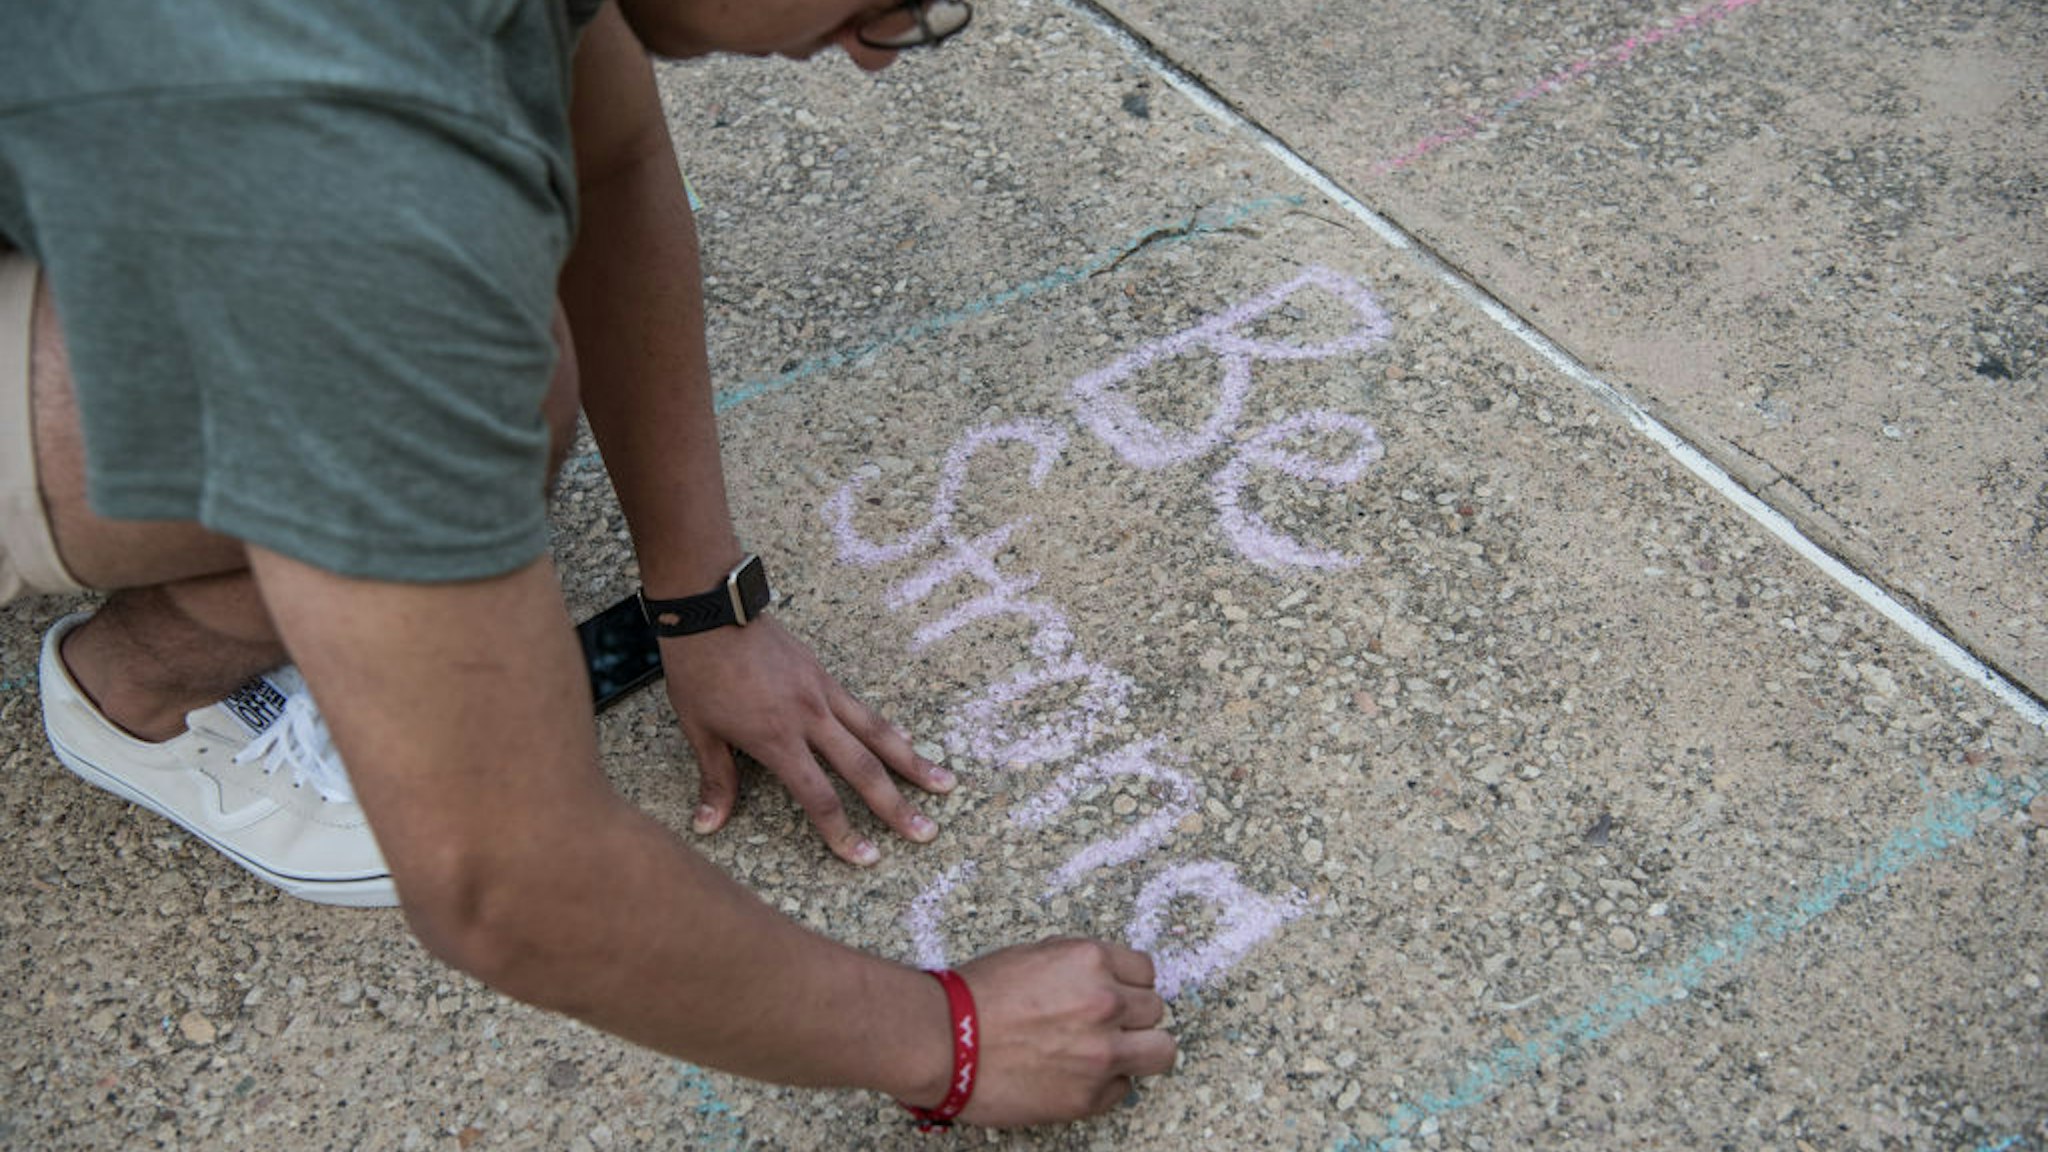 Juan Perez, 17, writes with chalk during a vigil at the University of Texas of the Permian Basin (UTPB) for the victims of a mass shooting, September 1, 2019 in Odessa, Texas.